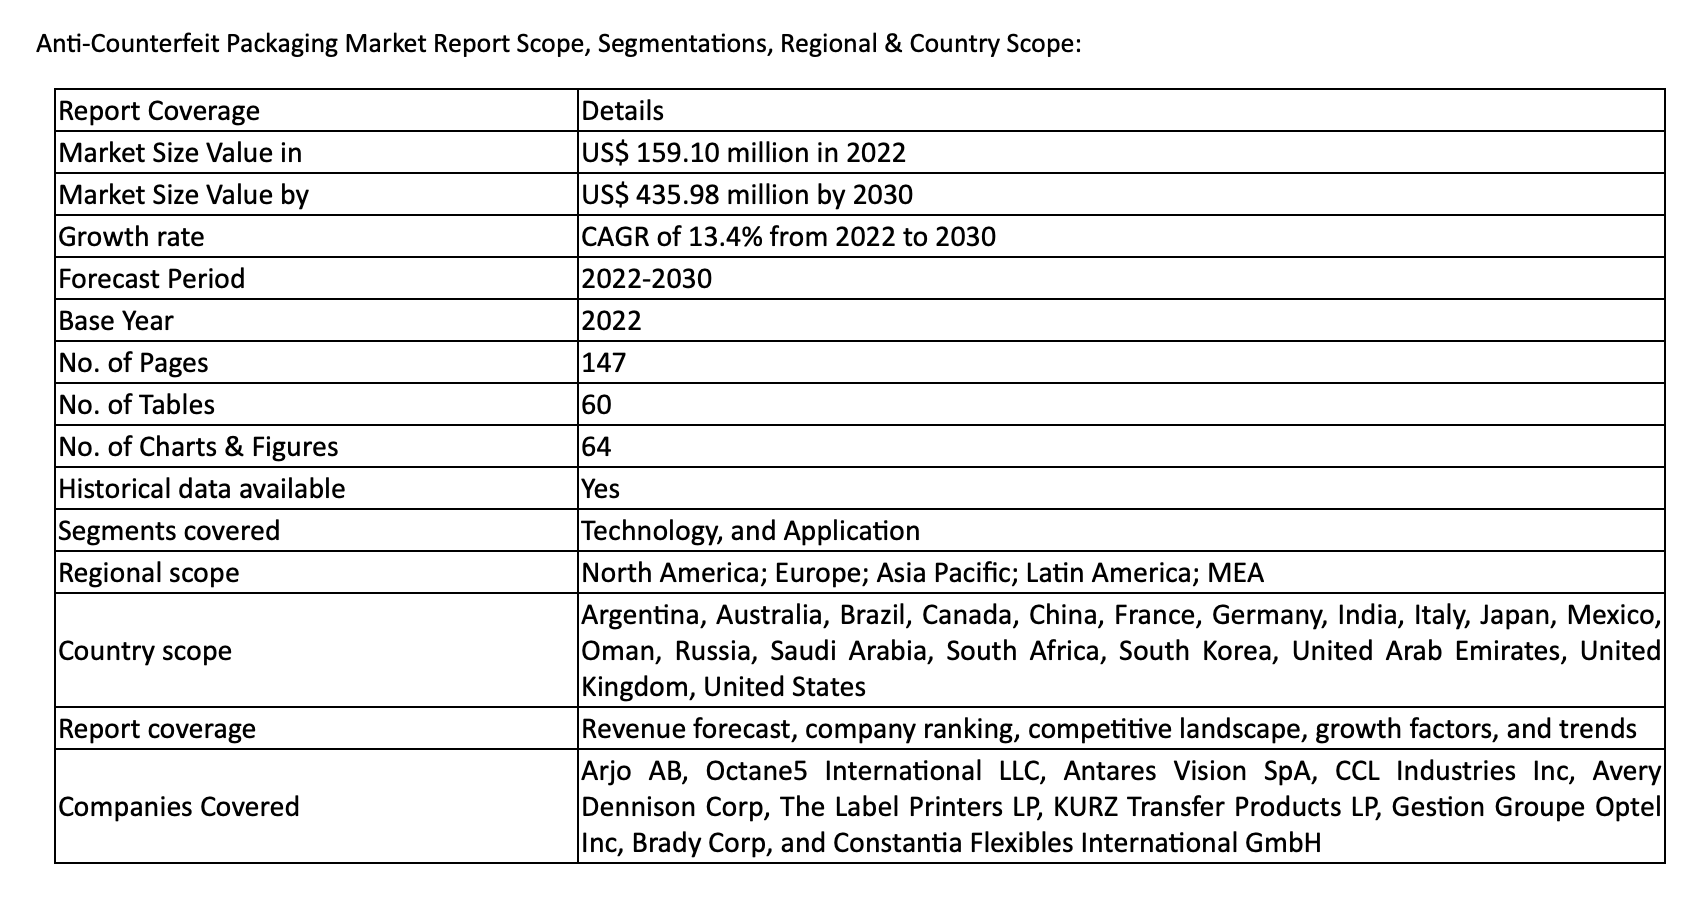 Anti-Counterfeit Packaging Market Report Scope, Segmentations, Regional & Country Scope. Image Credit: The Insight Partners